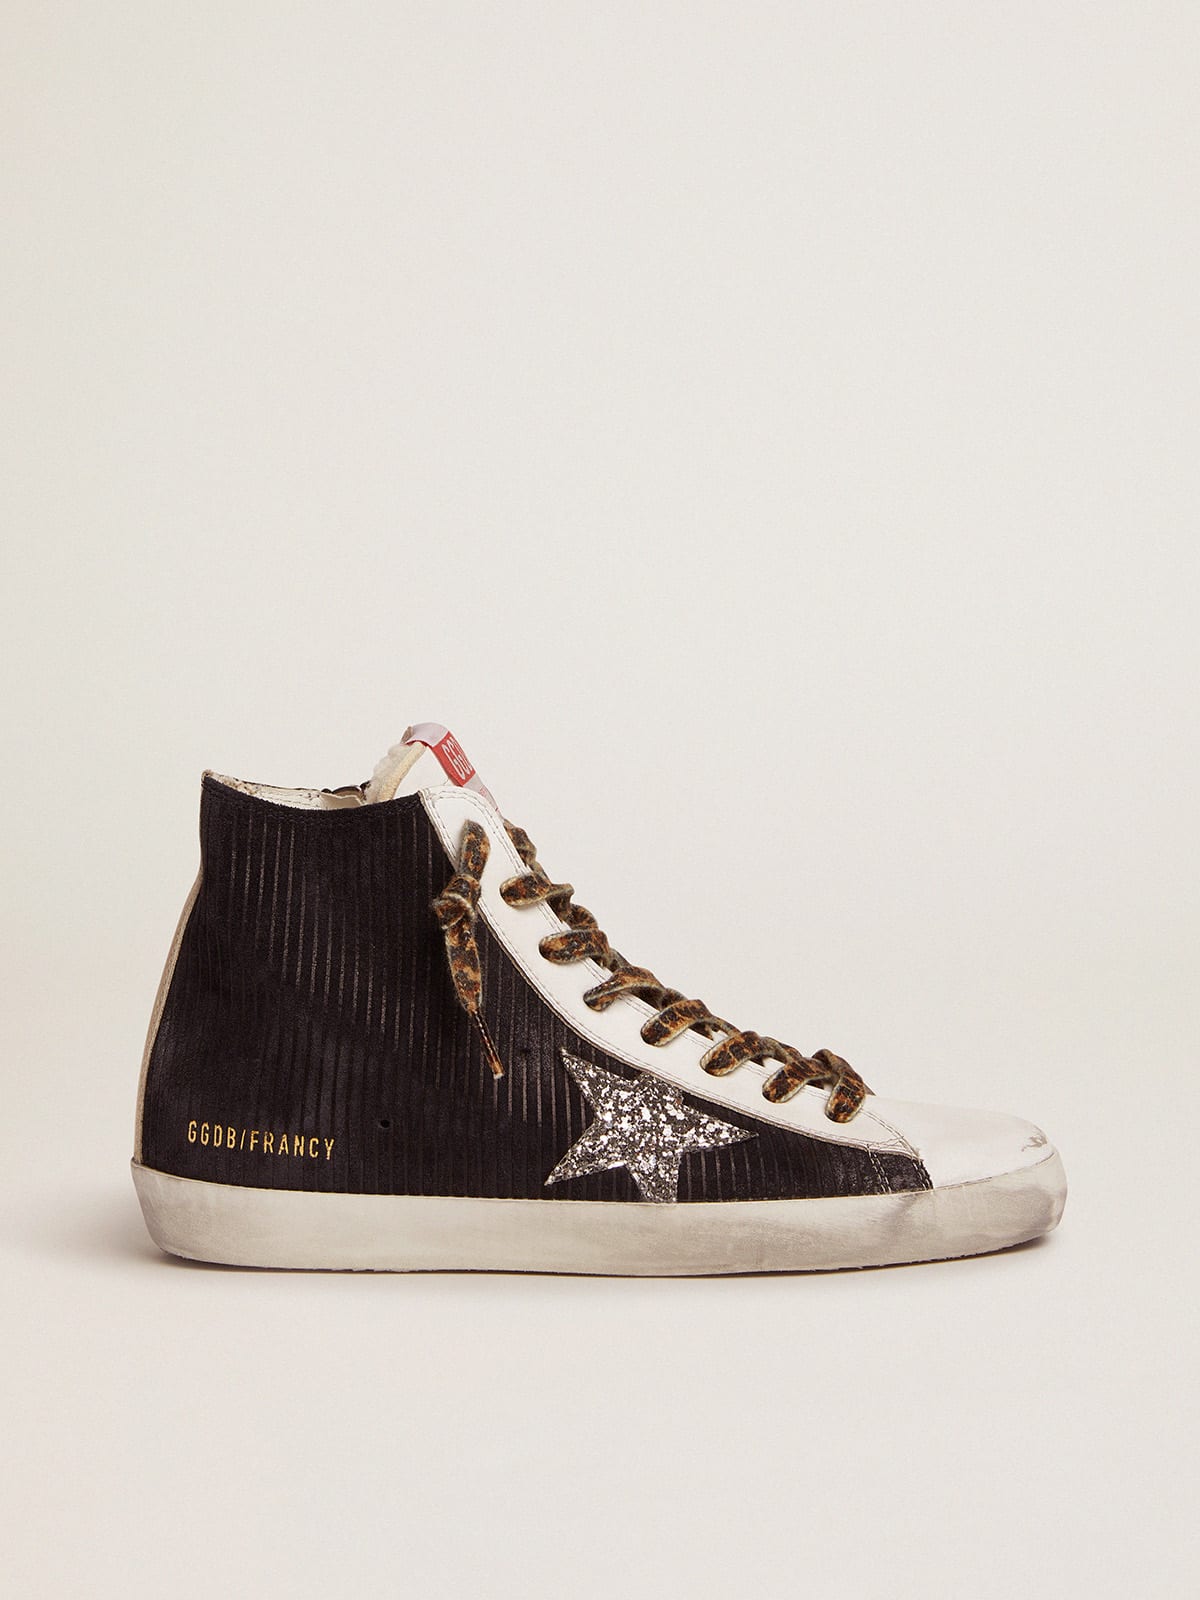 Francy sneakers in black suede with corduroy print and shearling lining |  Golden Goose